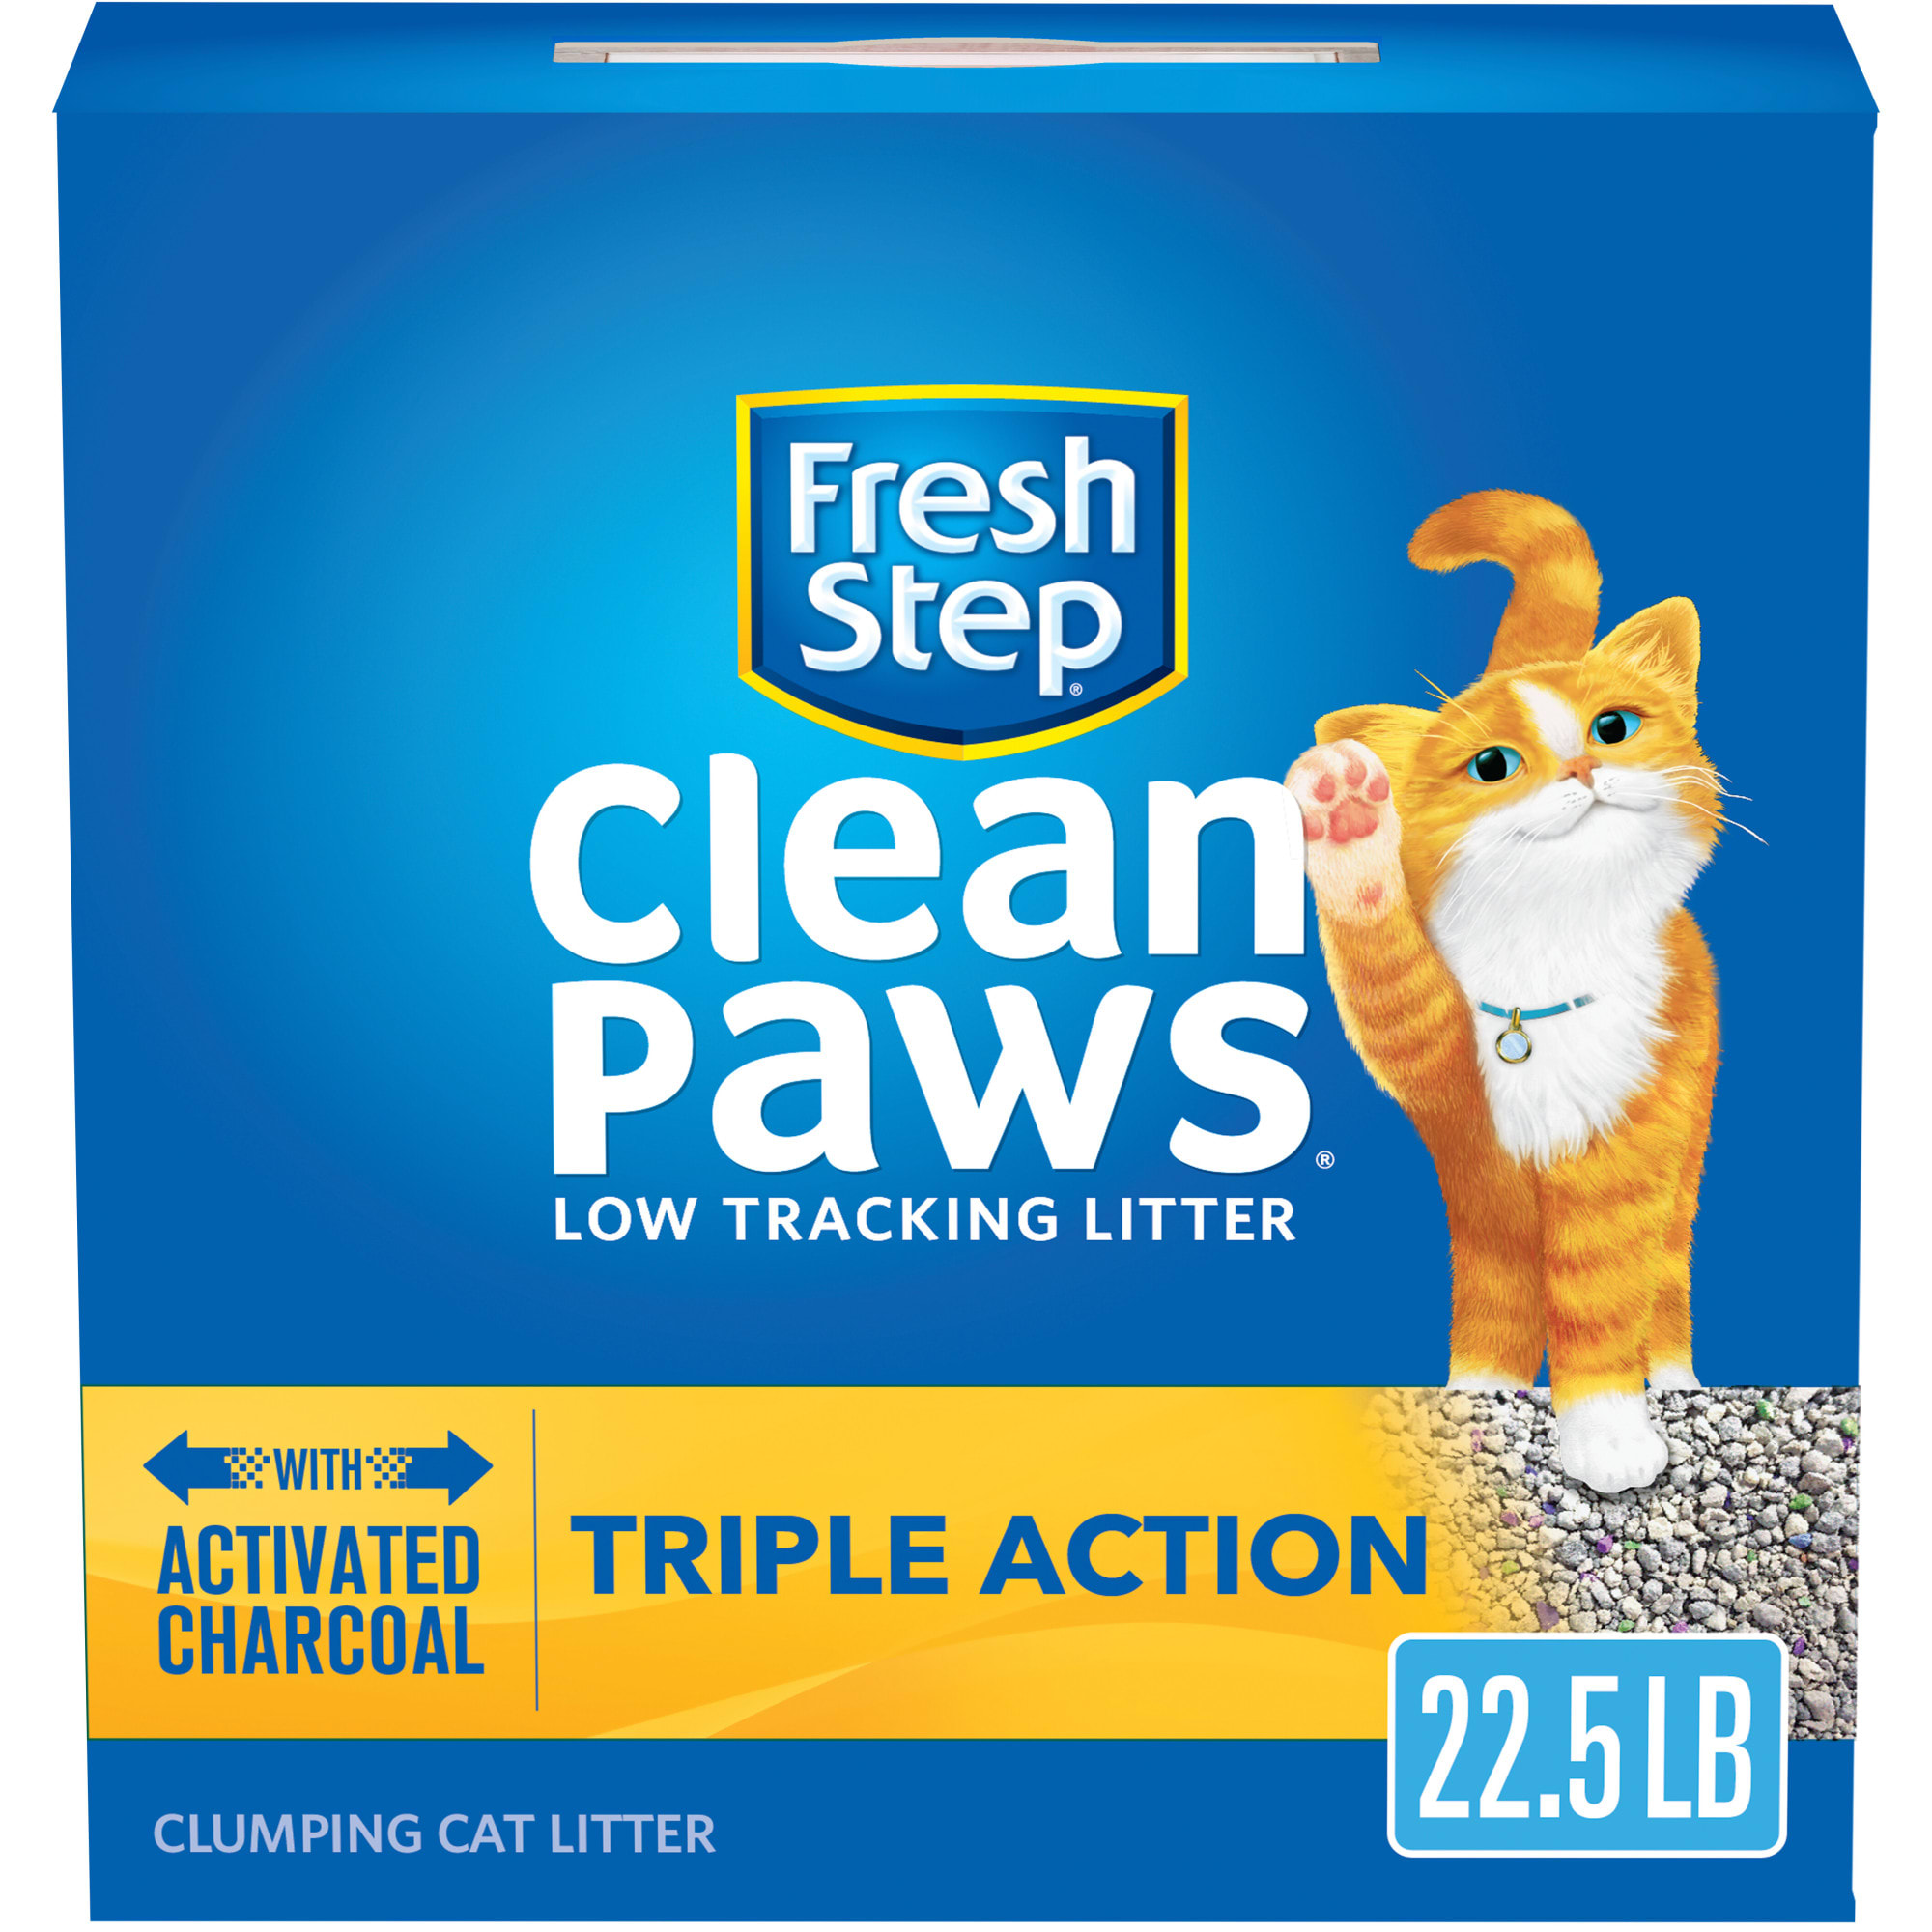 Fresh Step Clean Paws Triple Action Scented Litter Clumping Cat Litter 22.5 